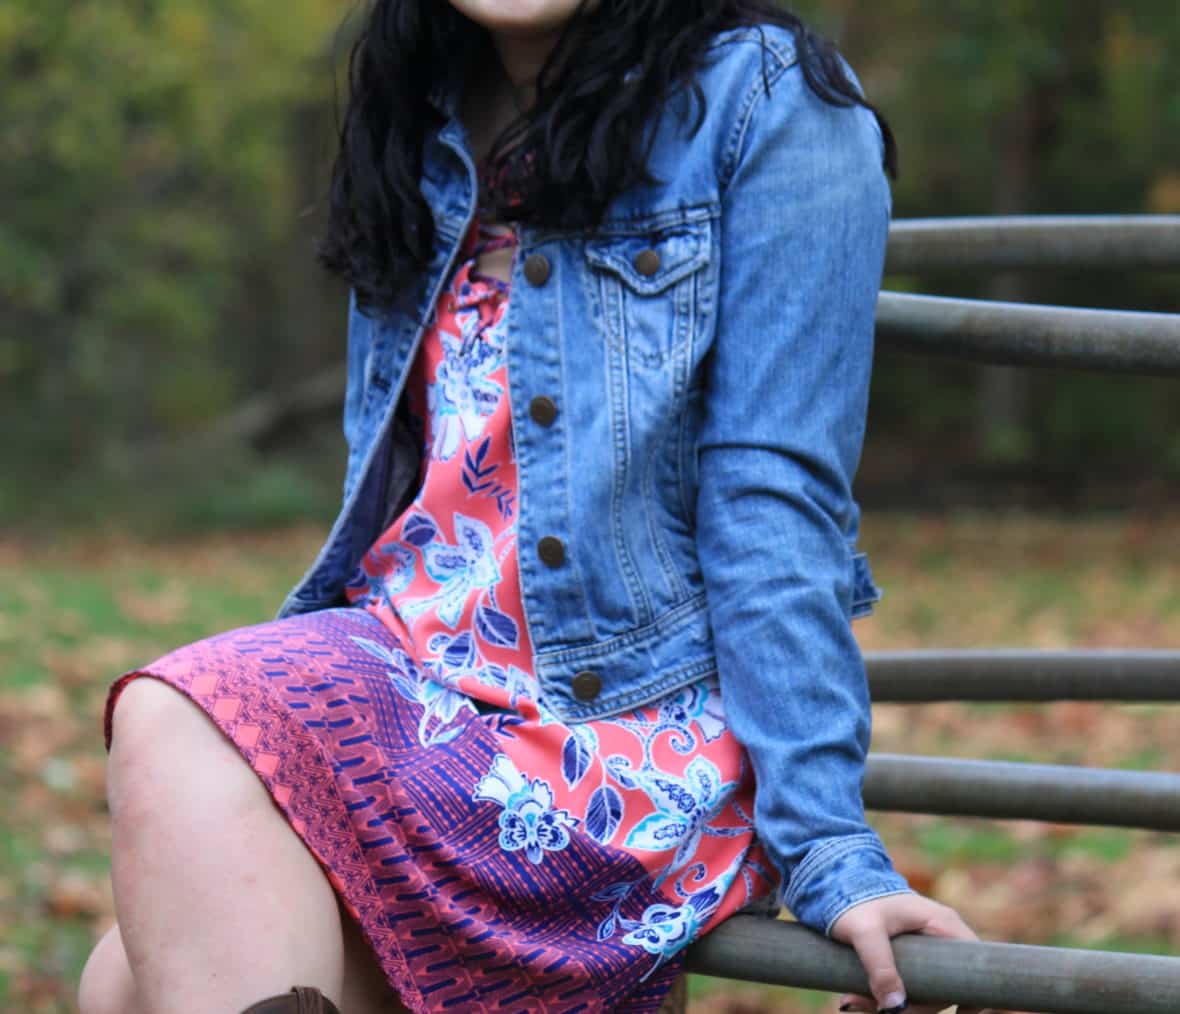 Abbey wears a coral, pink, and purple floral print summer dress with a distressed denim jacket.